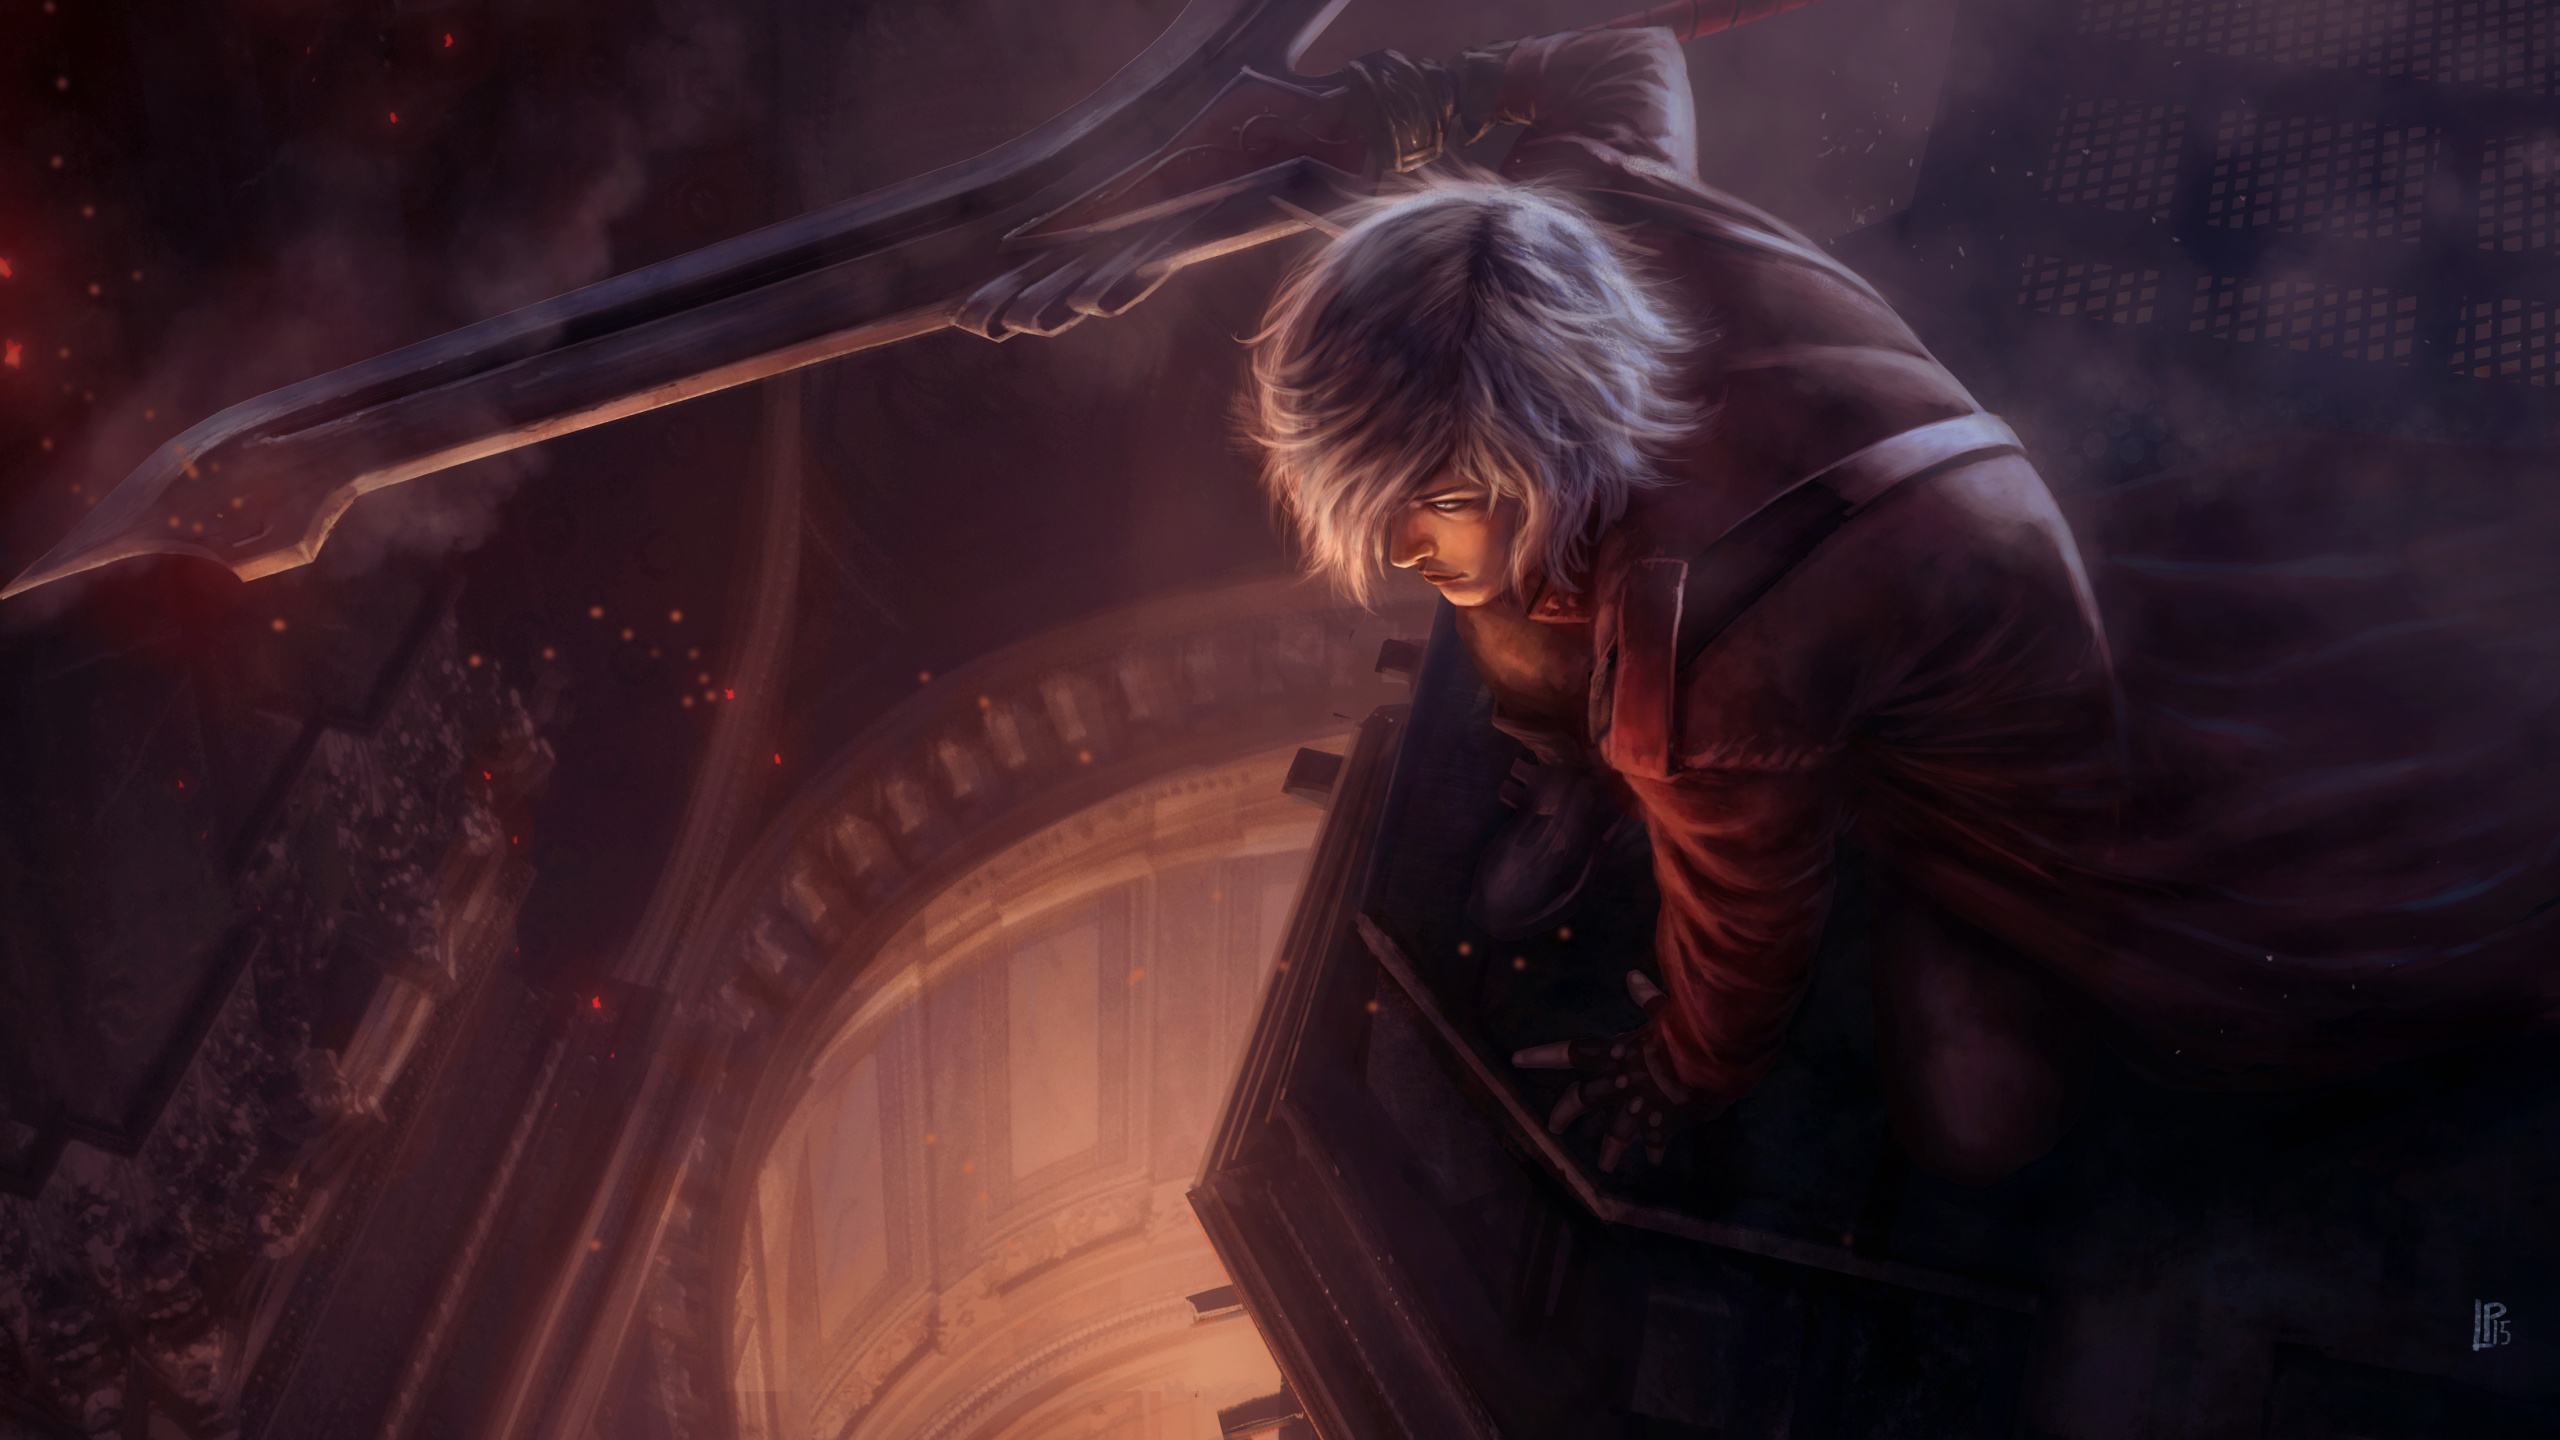 Devil May Cry, Devil May Cry 5, Dmc Devil May Cry, Devil May Cry 4, Dante. Wallpaper in 2560x1440 Resolution